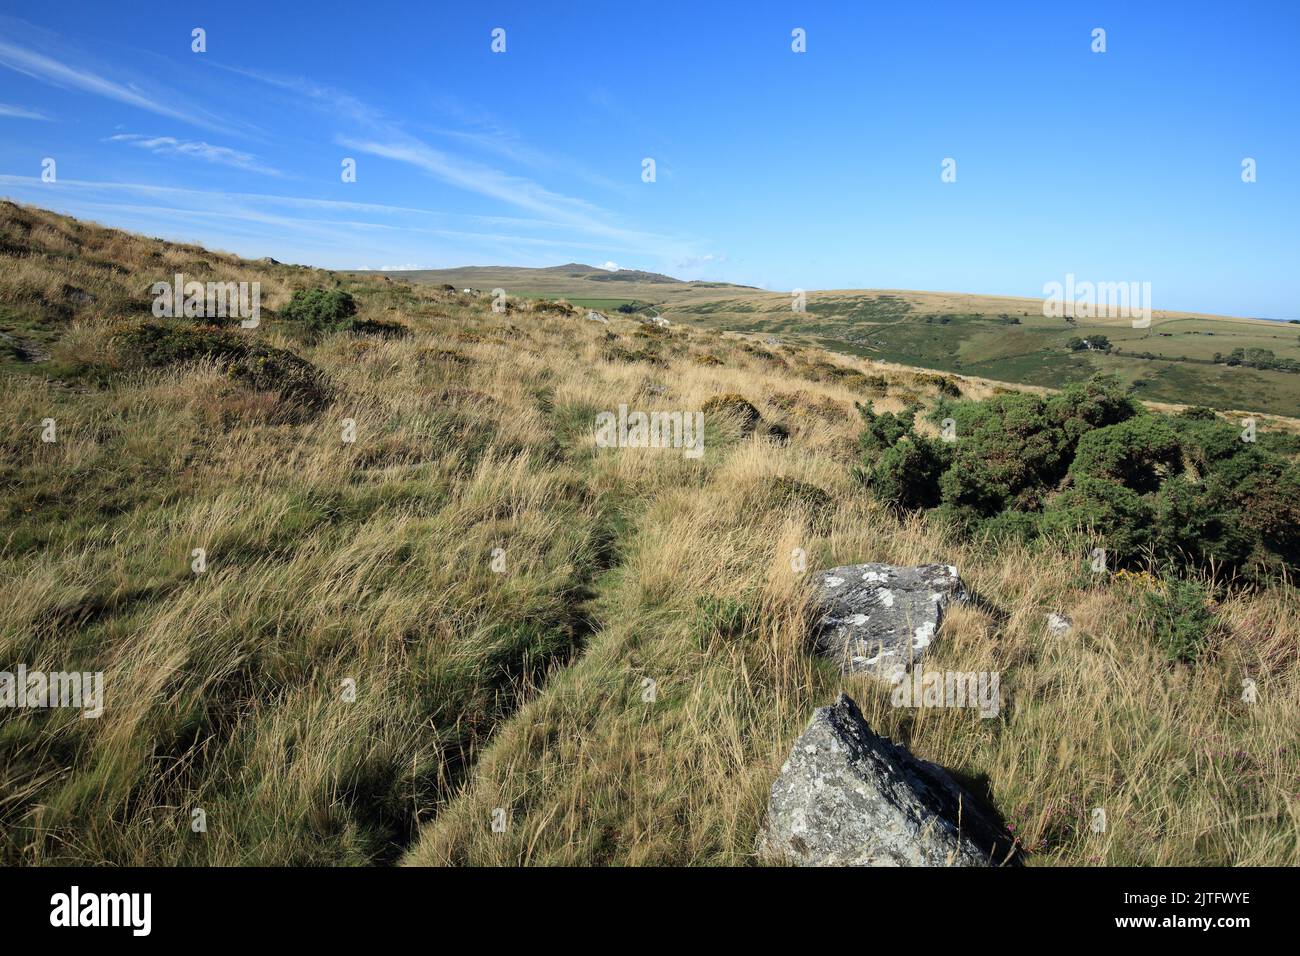 View from Belstone Common, Towards Yes tor and West mill tor, Dartmoor, Devon, England, UK Stock Photo